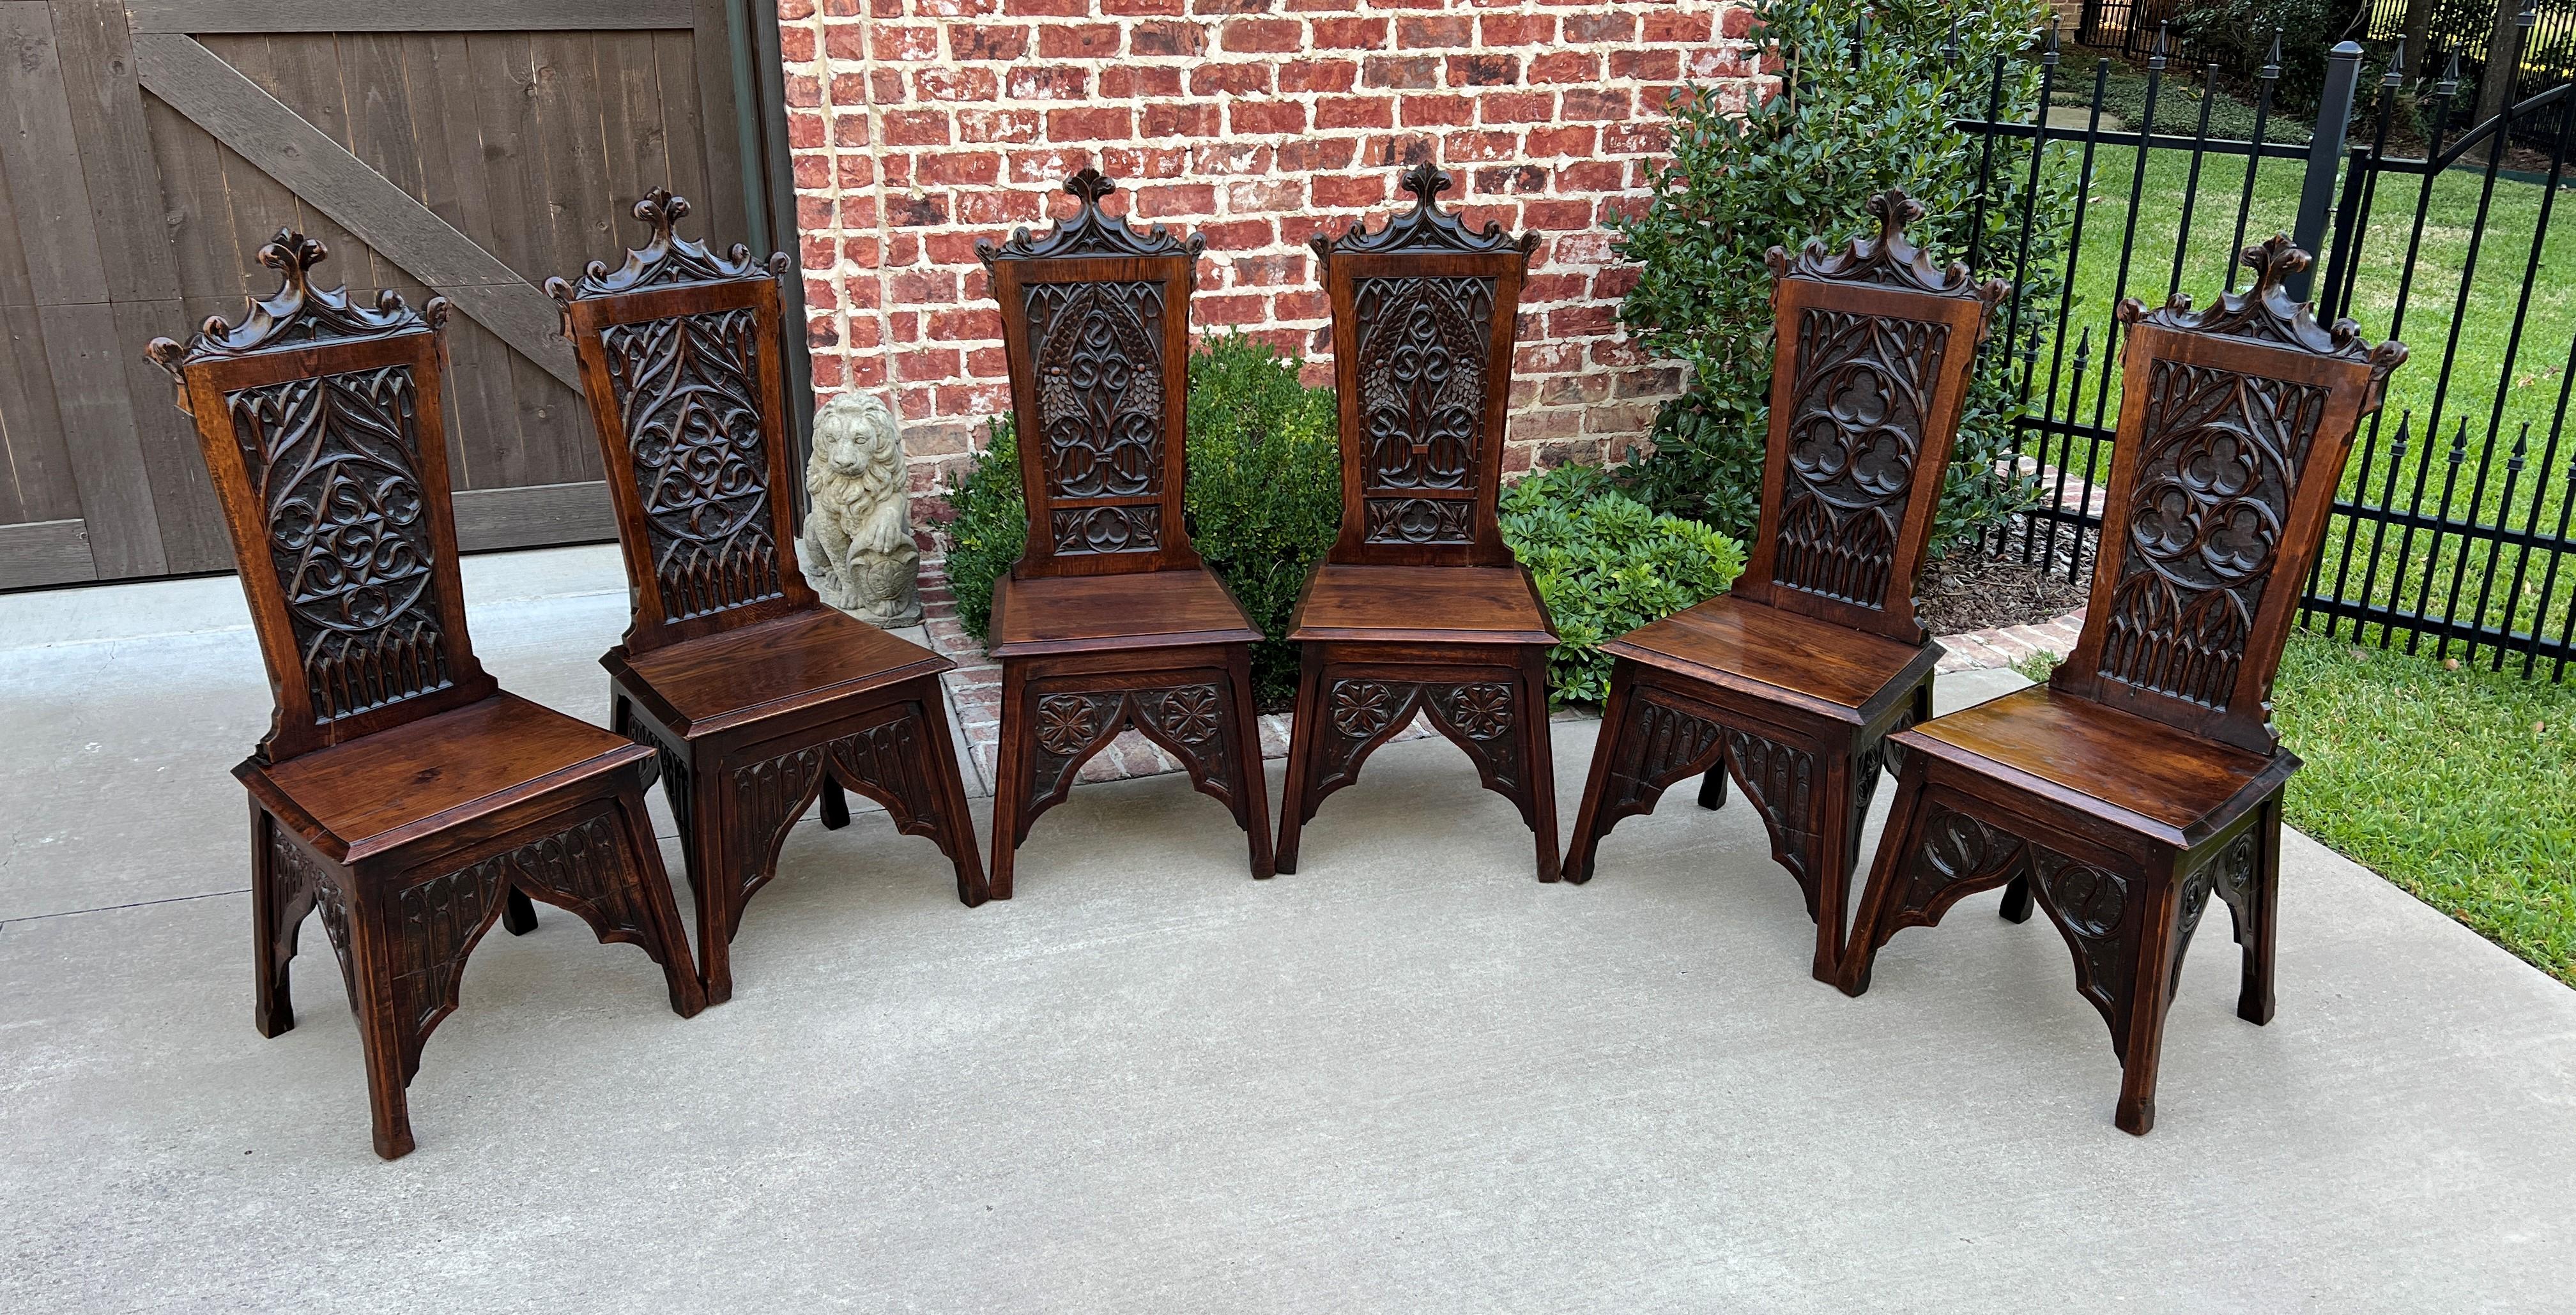 Gorgeous antique French oak gothic revival set of 6 dining or side chairs~~c. 1880s-1890s 

HARD-TO-FIND SET OF 6 highly carved oak chairs~~crown finials, linen fold and trefoil accents with Gothic arches and hand carved spandrels~~a fine example